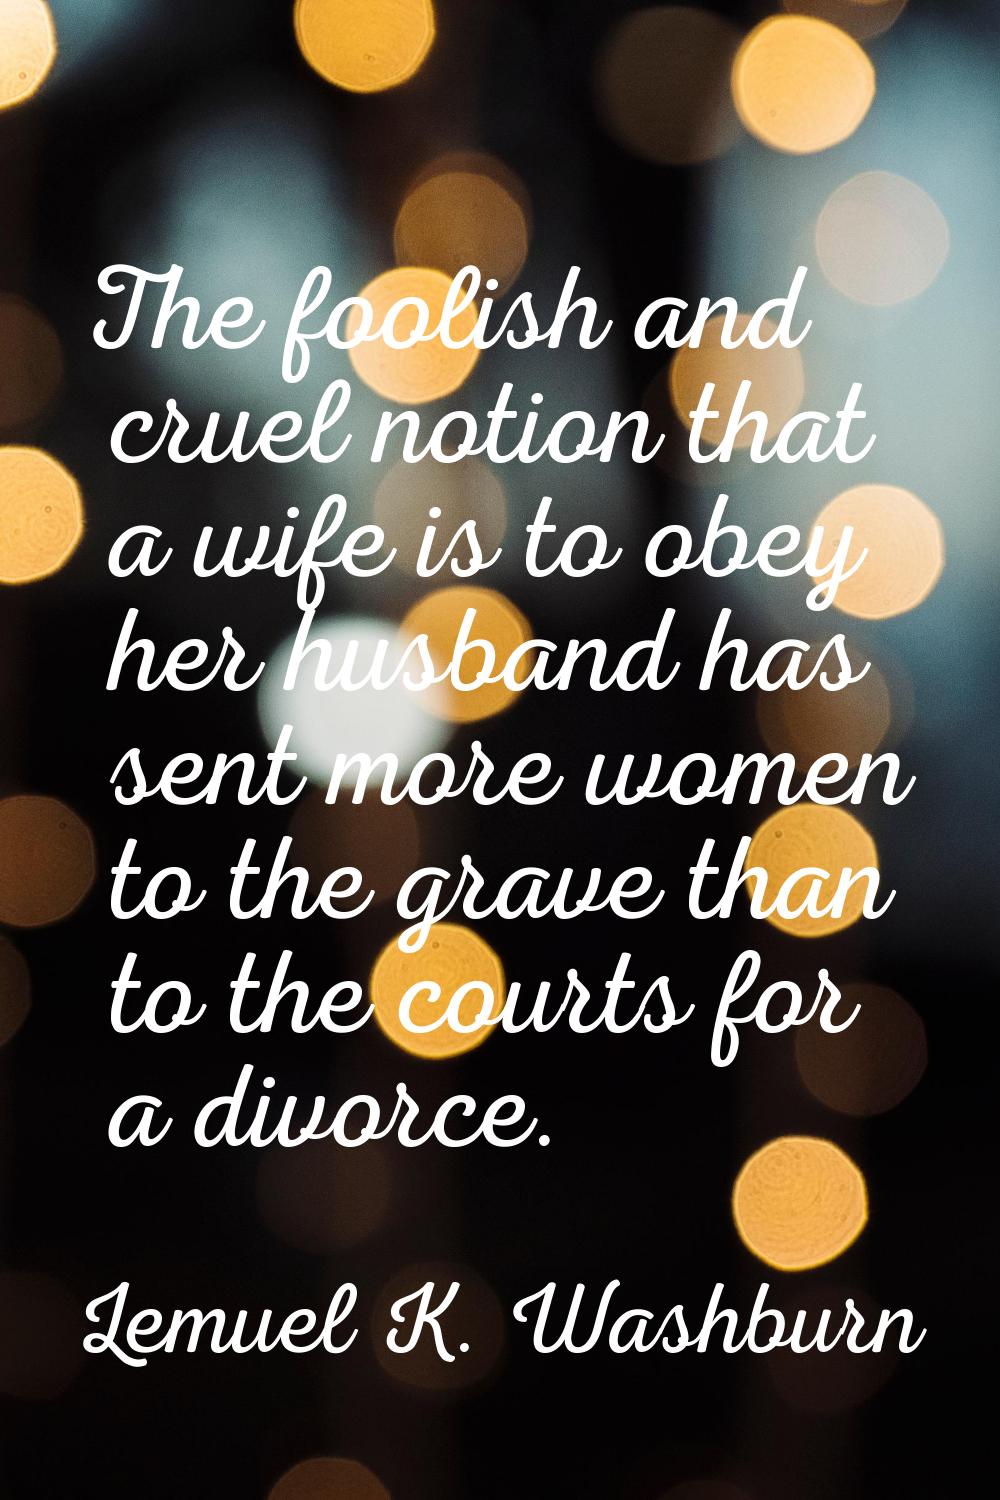 The foolish and cruel notion that a wife is to obey her husband has sent more women to the grave th